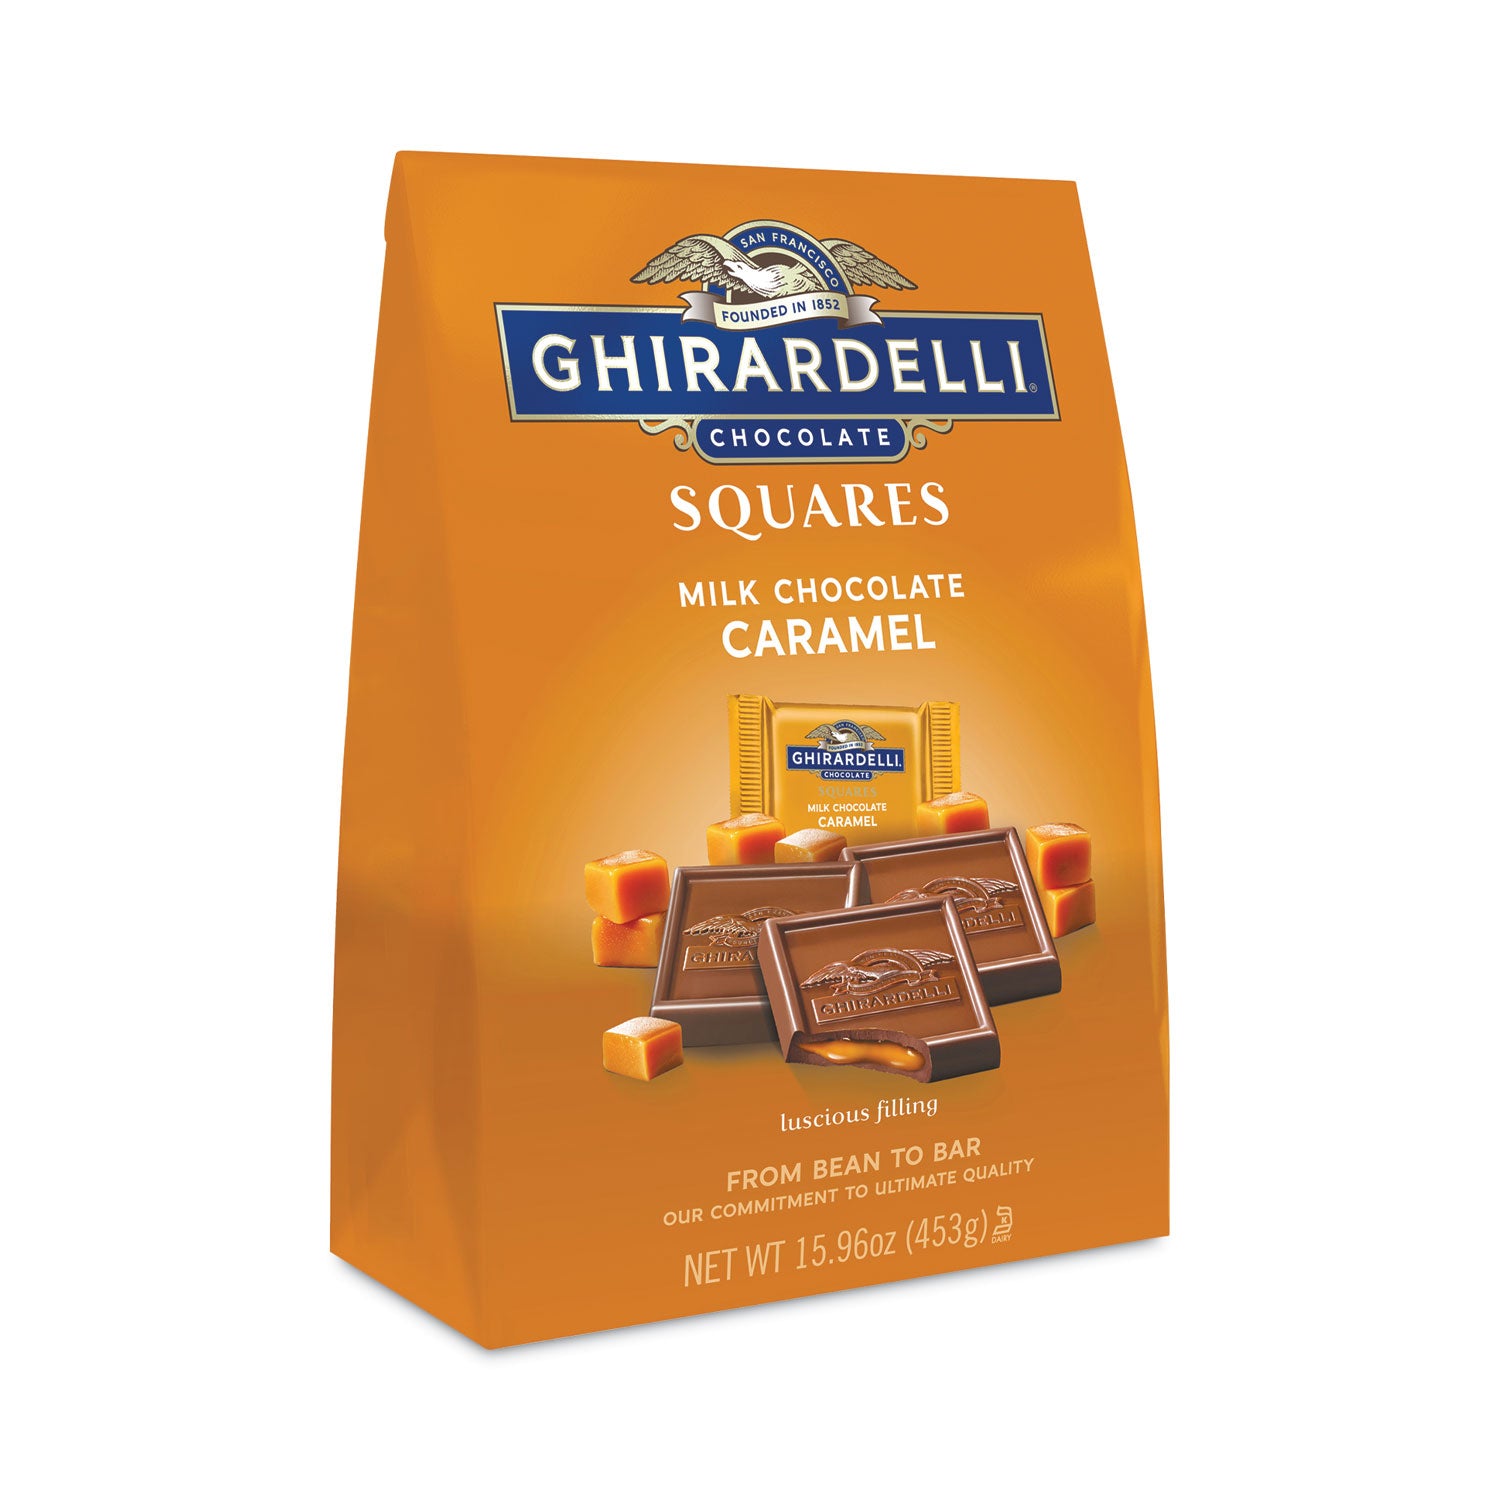 milk-chocolate-and-caramel-chocolate-squares-1596-oz-bag-ships-in-1-3-business-days_grr30001035 - 1